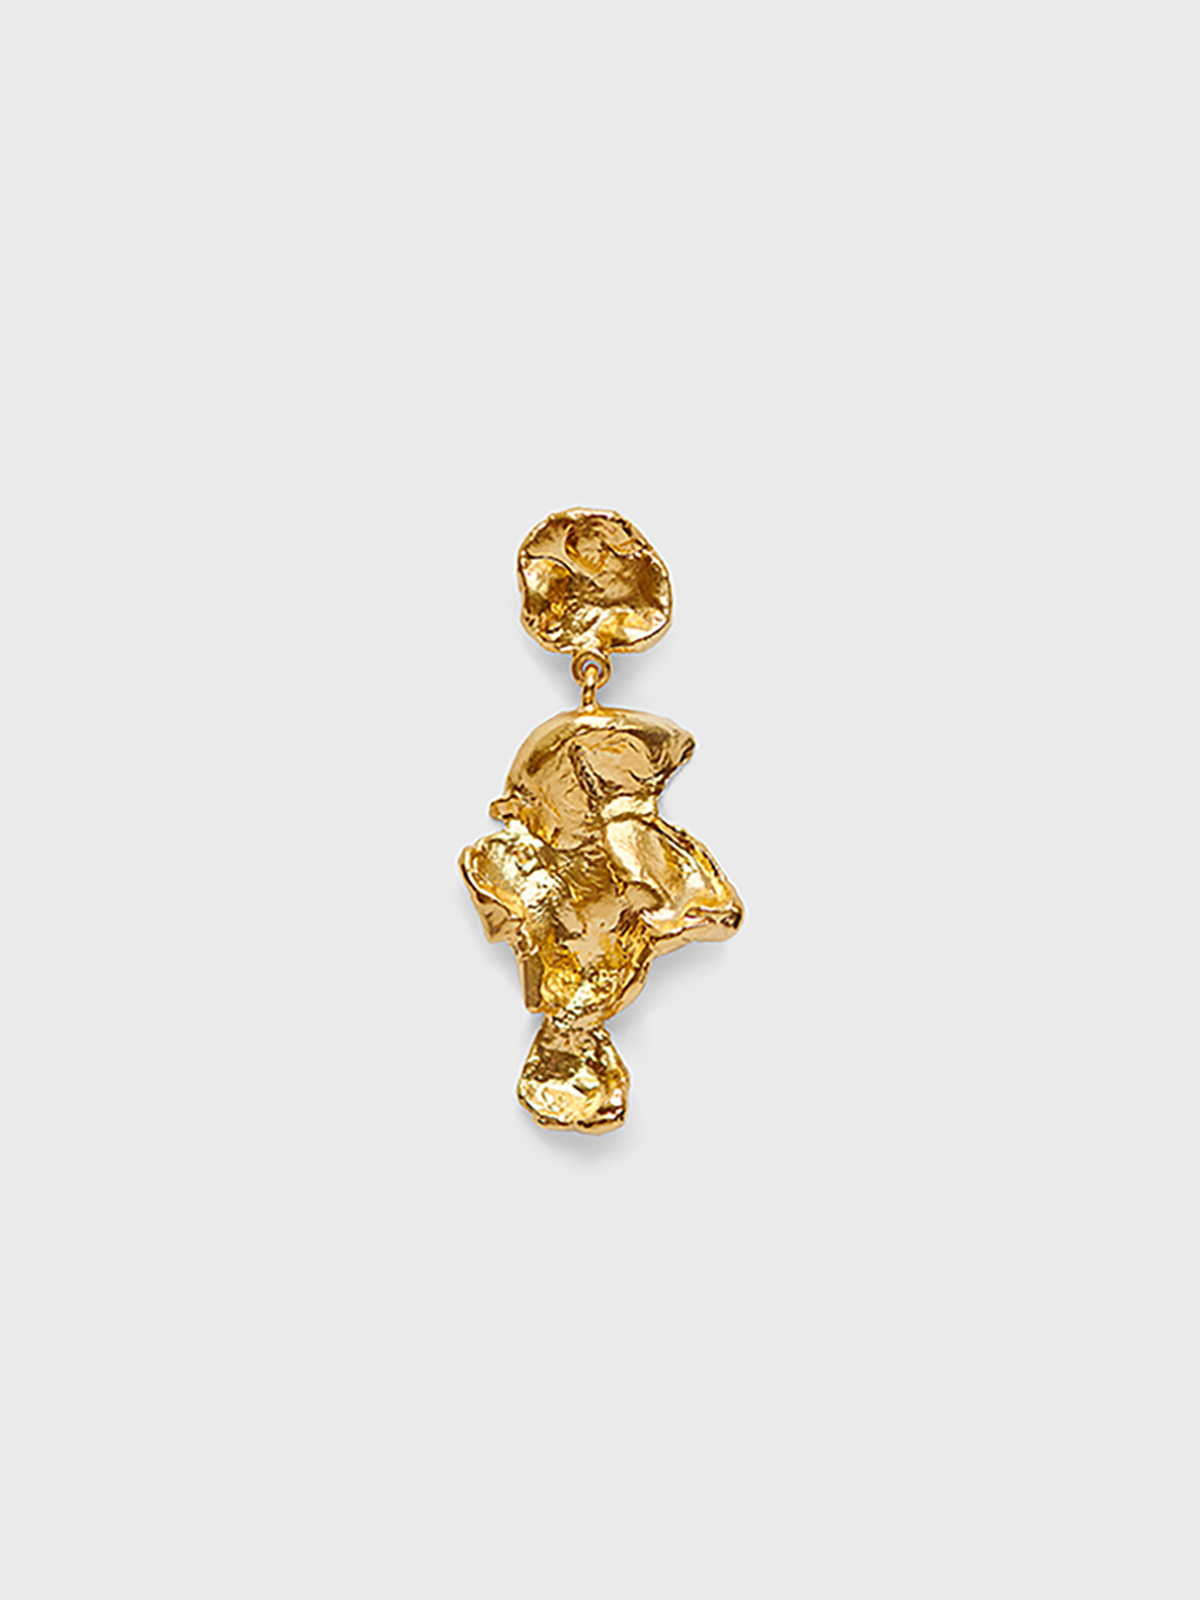 Lea Hoyer - Kirsten Earring with Gold Plating